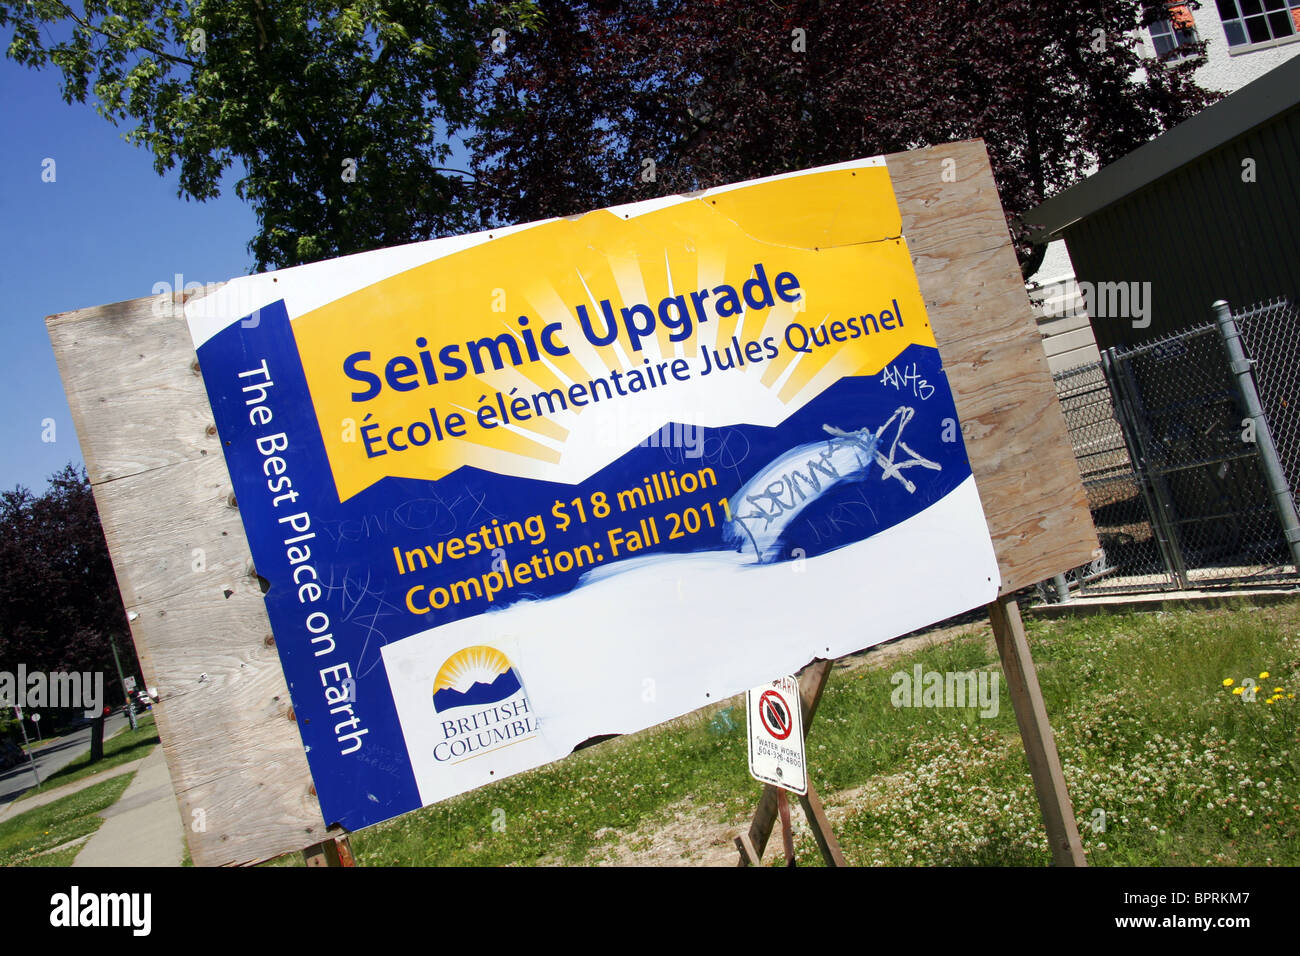 Seismic upgrade at Canadian School Stock Photo